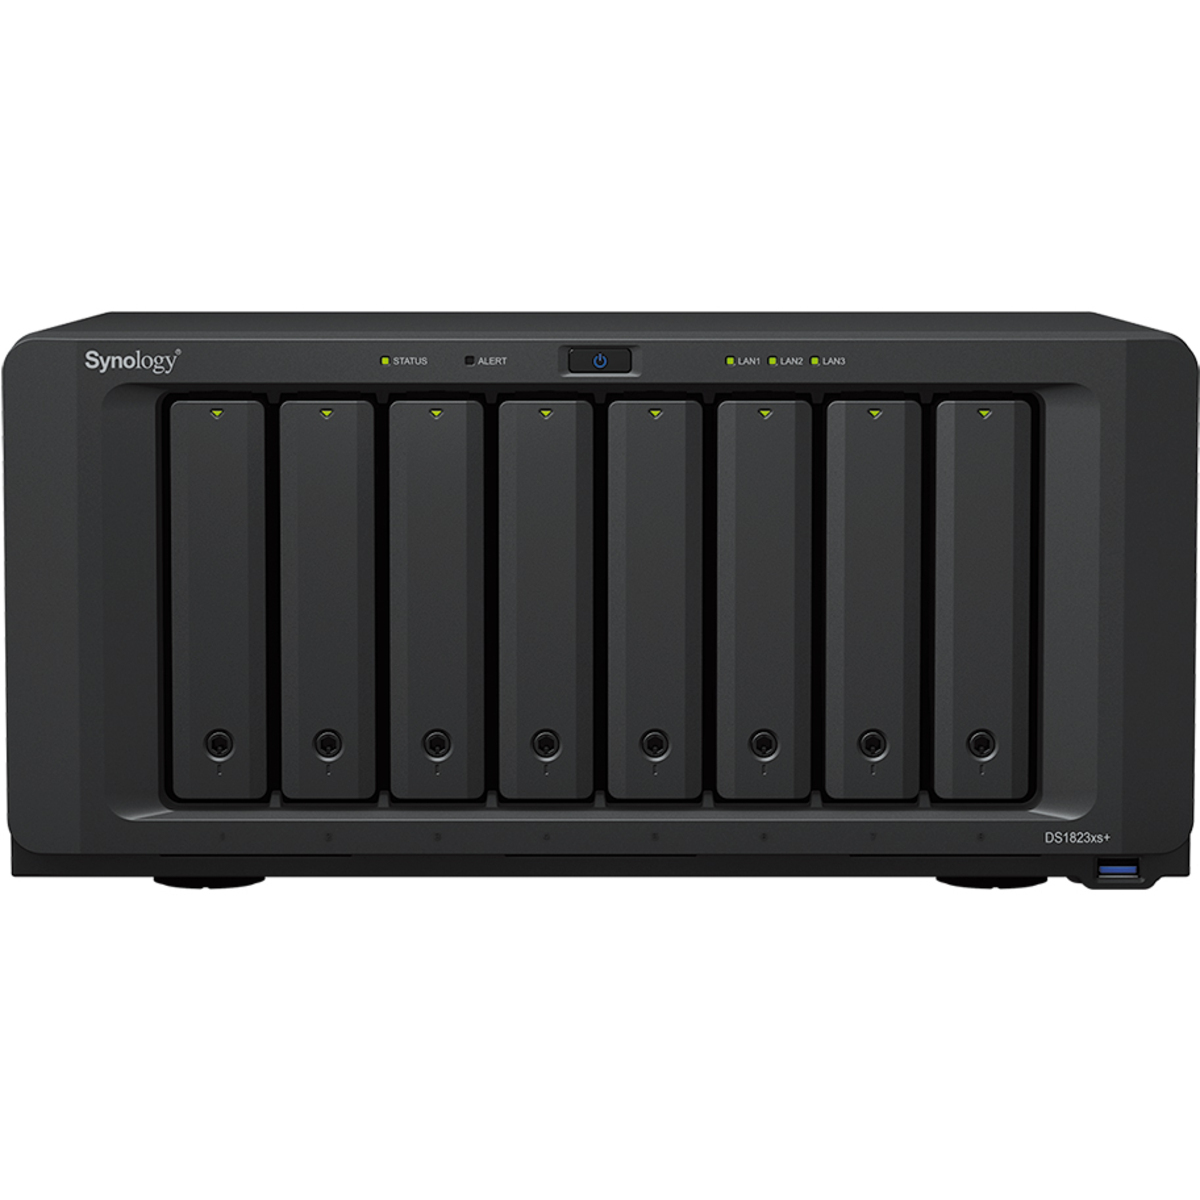 Synology DiskStation DS1823xs+ 28tb 8-Bay Desktop Multimedia / Power User / Business NAS - Network Attached Storage Device 7x4tb Western Digital Gold WD4003FRYZ 3.5 7200rpm SATA 6Gb/s HDD ENTERPRISE Class Drives Installed - Burn-In Tested DiskStation DS1823xs+